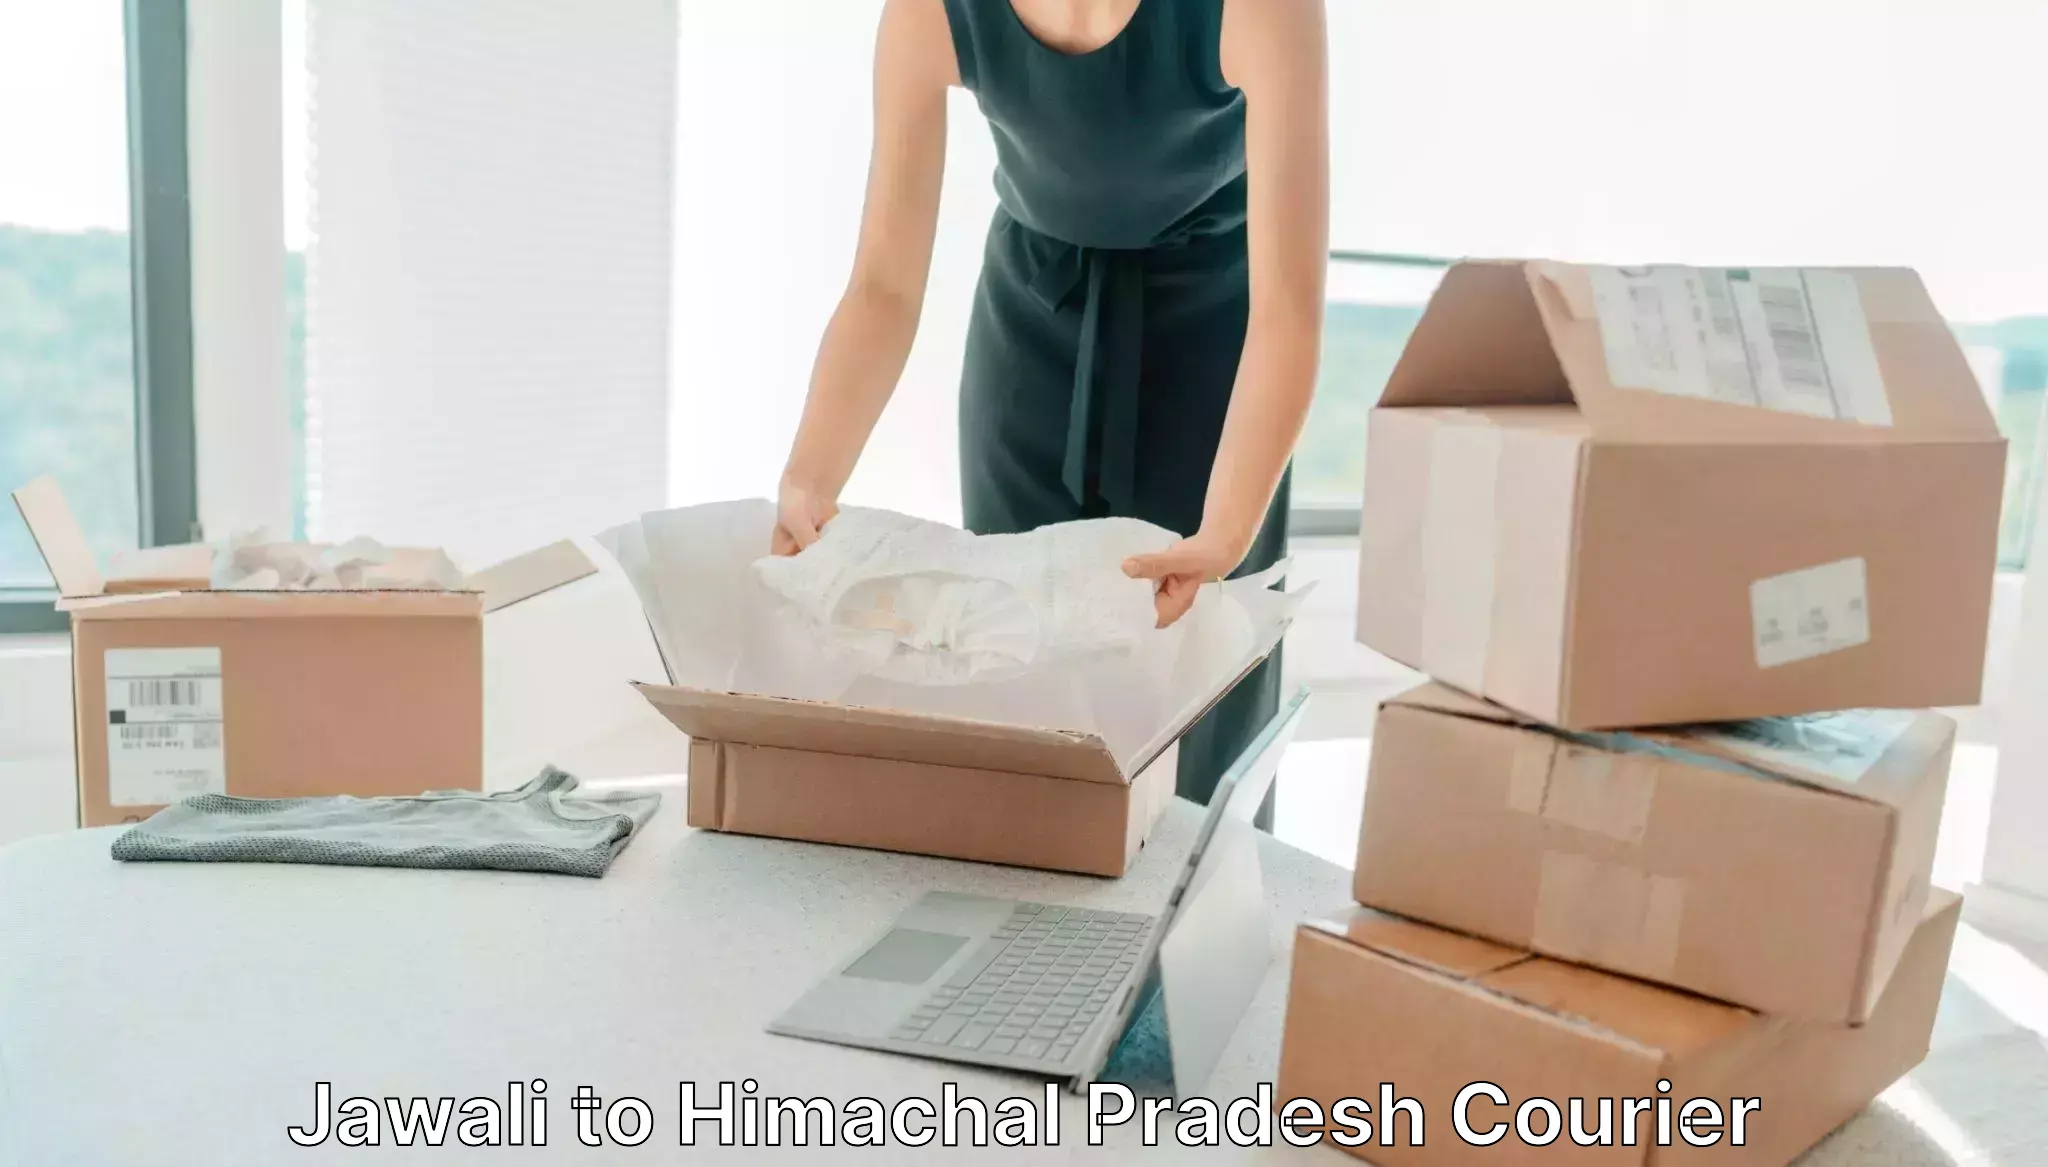 Subscription-based courier Jawali to Himachal Pradesh